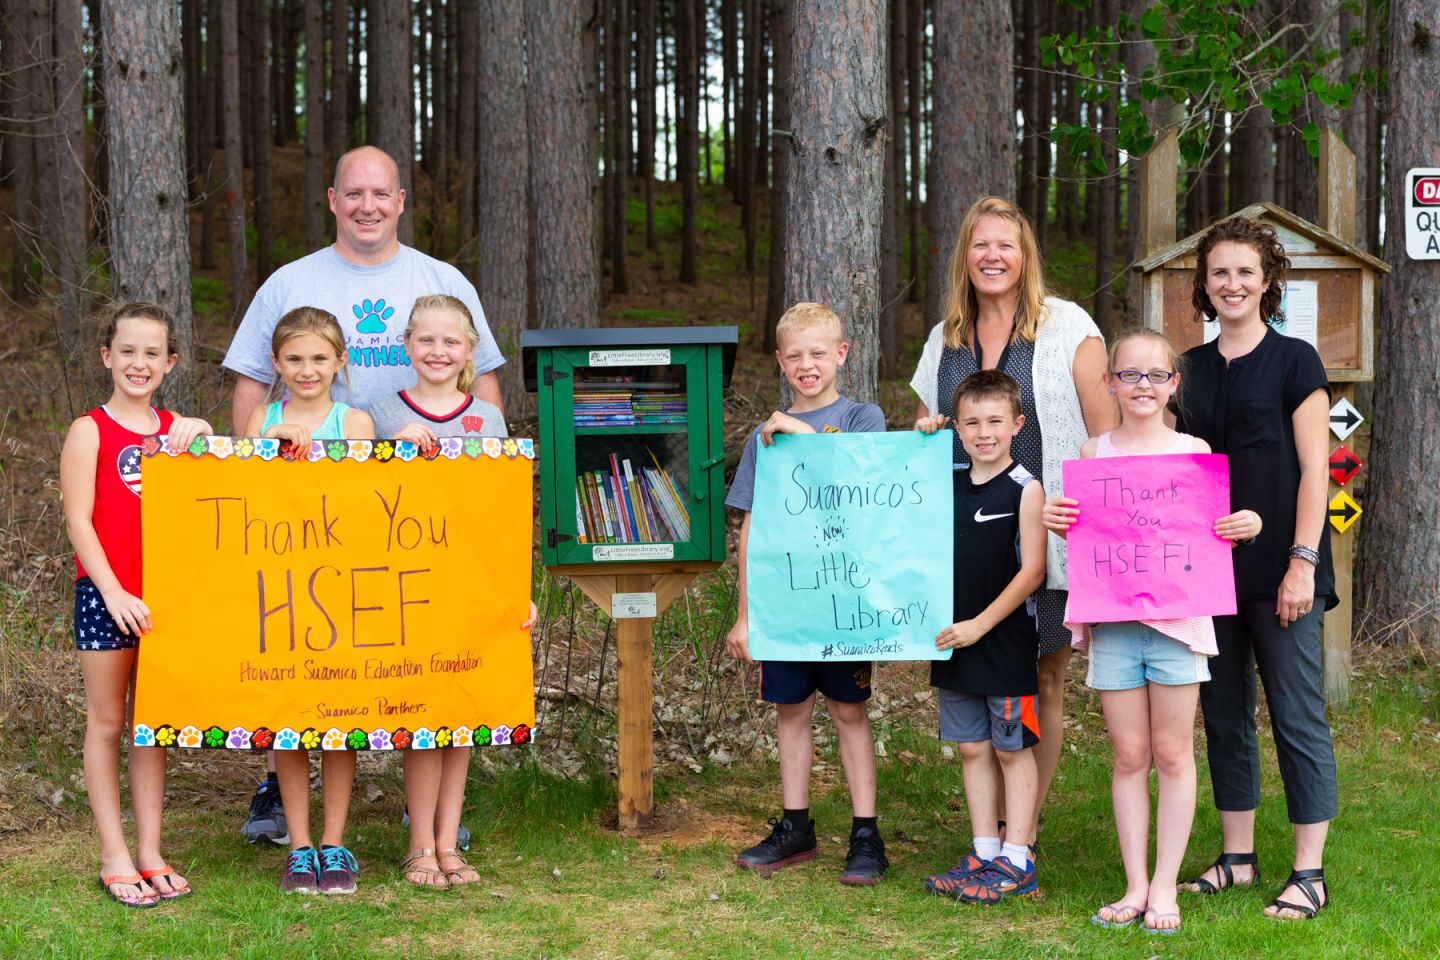 HSEF Grant Supports “Little Free Library” at Suamico Elementary